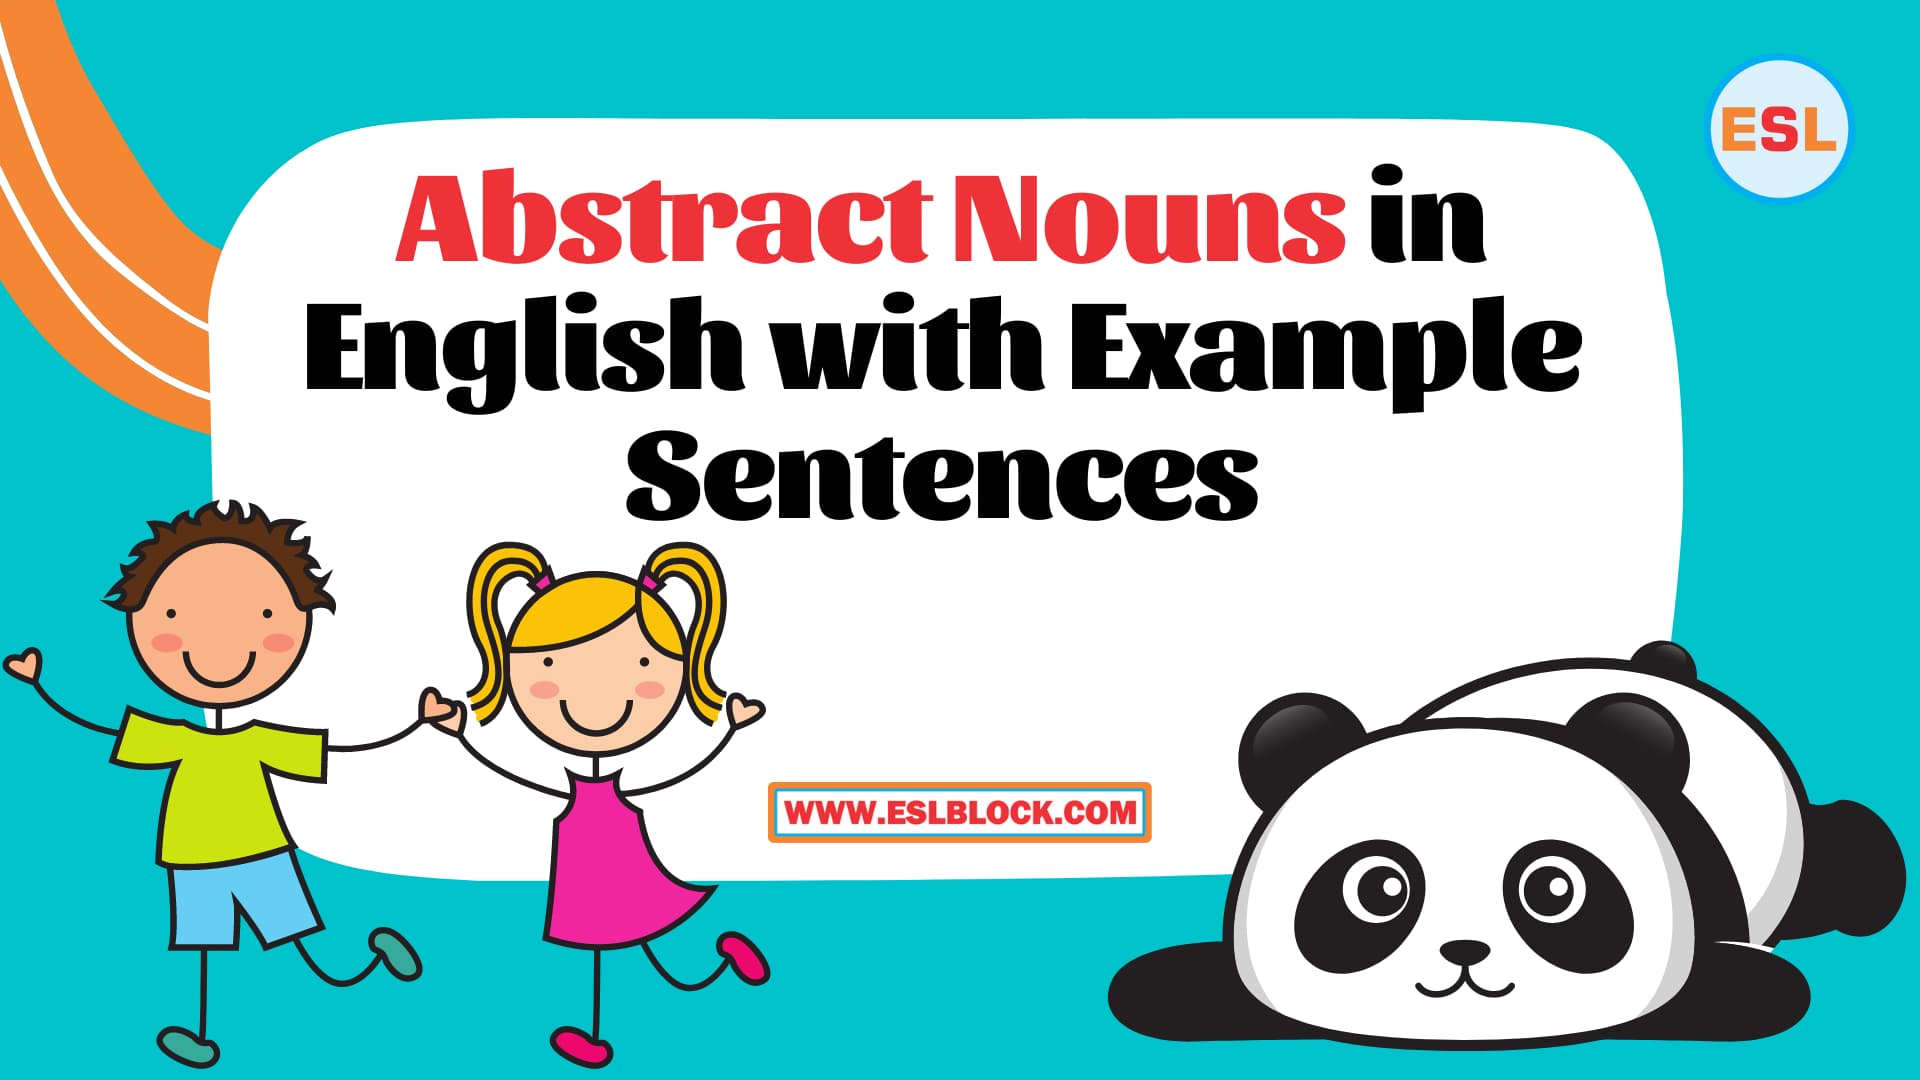 100 Example Sentences Using Abstract, Abstract nouns, Abstract nouns list, Abstract Nouns Vocabulary, Abstract Nouns with Example Sentences, All Abstract nouns, List of Abstract nouns, Types of Nouns, Types of Nouns with Example Sentences, What are Concrete Nouns, What are Nouns, What are the types of Nouns, What is a Noun